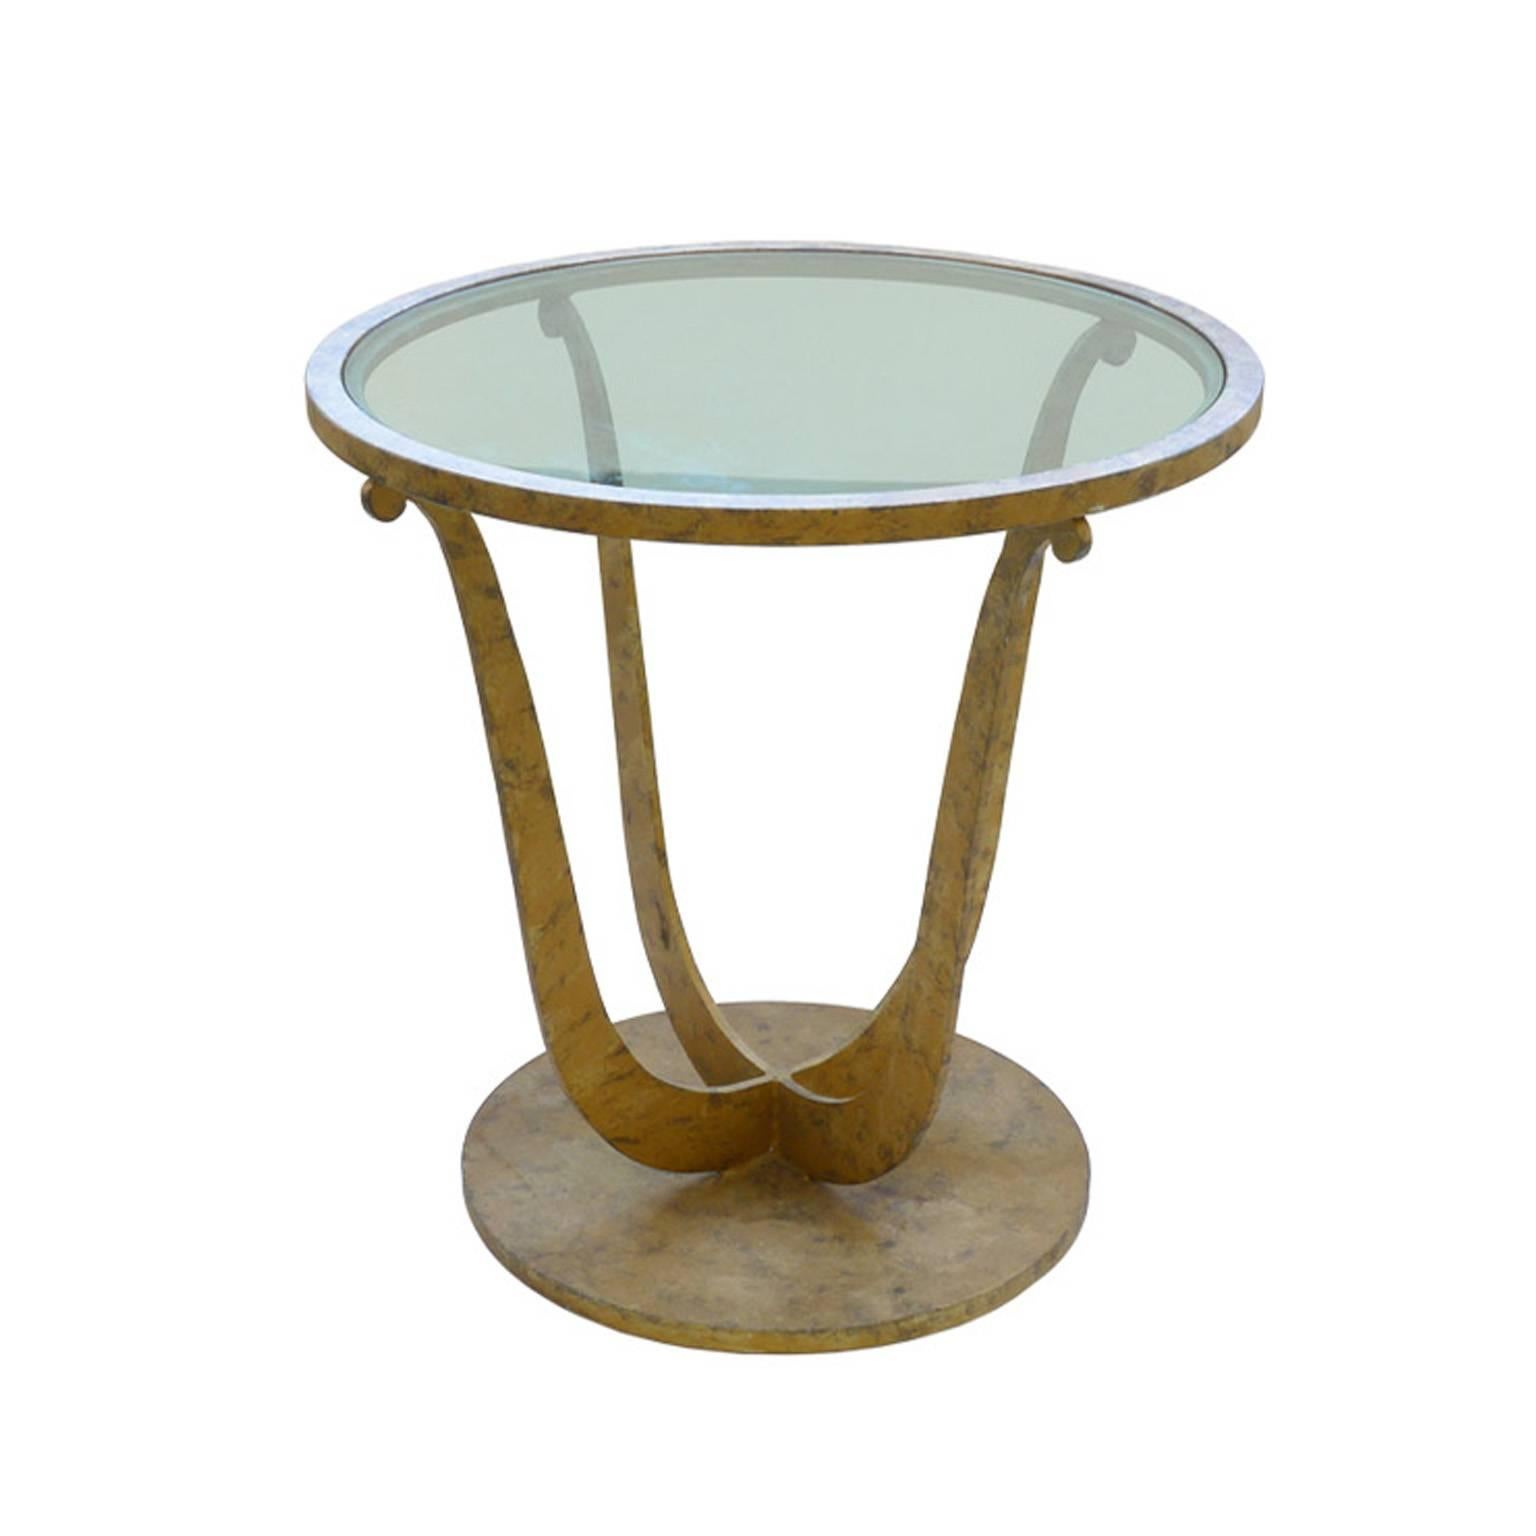 Art Deco Style gilt metal round occasional table with clear glass insert. Thick round metal base four scroll shaped legs. Purchase includes 24 inch diameter flat glass pendant light, current Duesenberg LTD Production. Mid-Century Modern style. Top